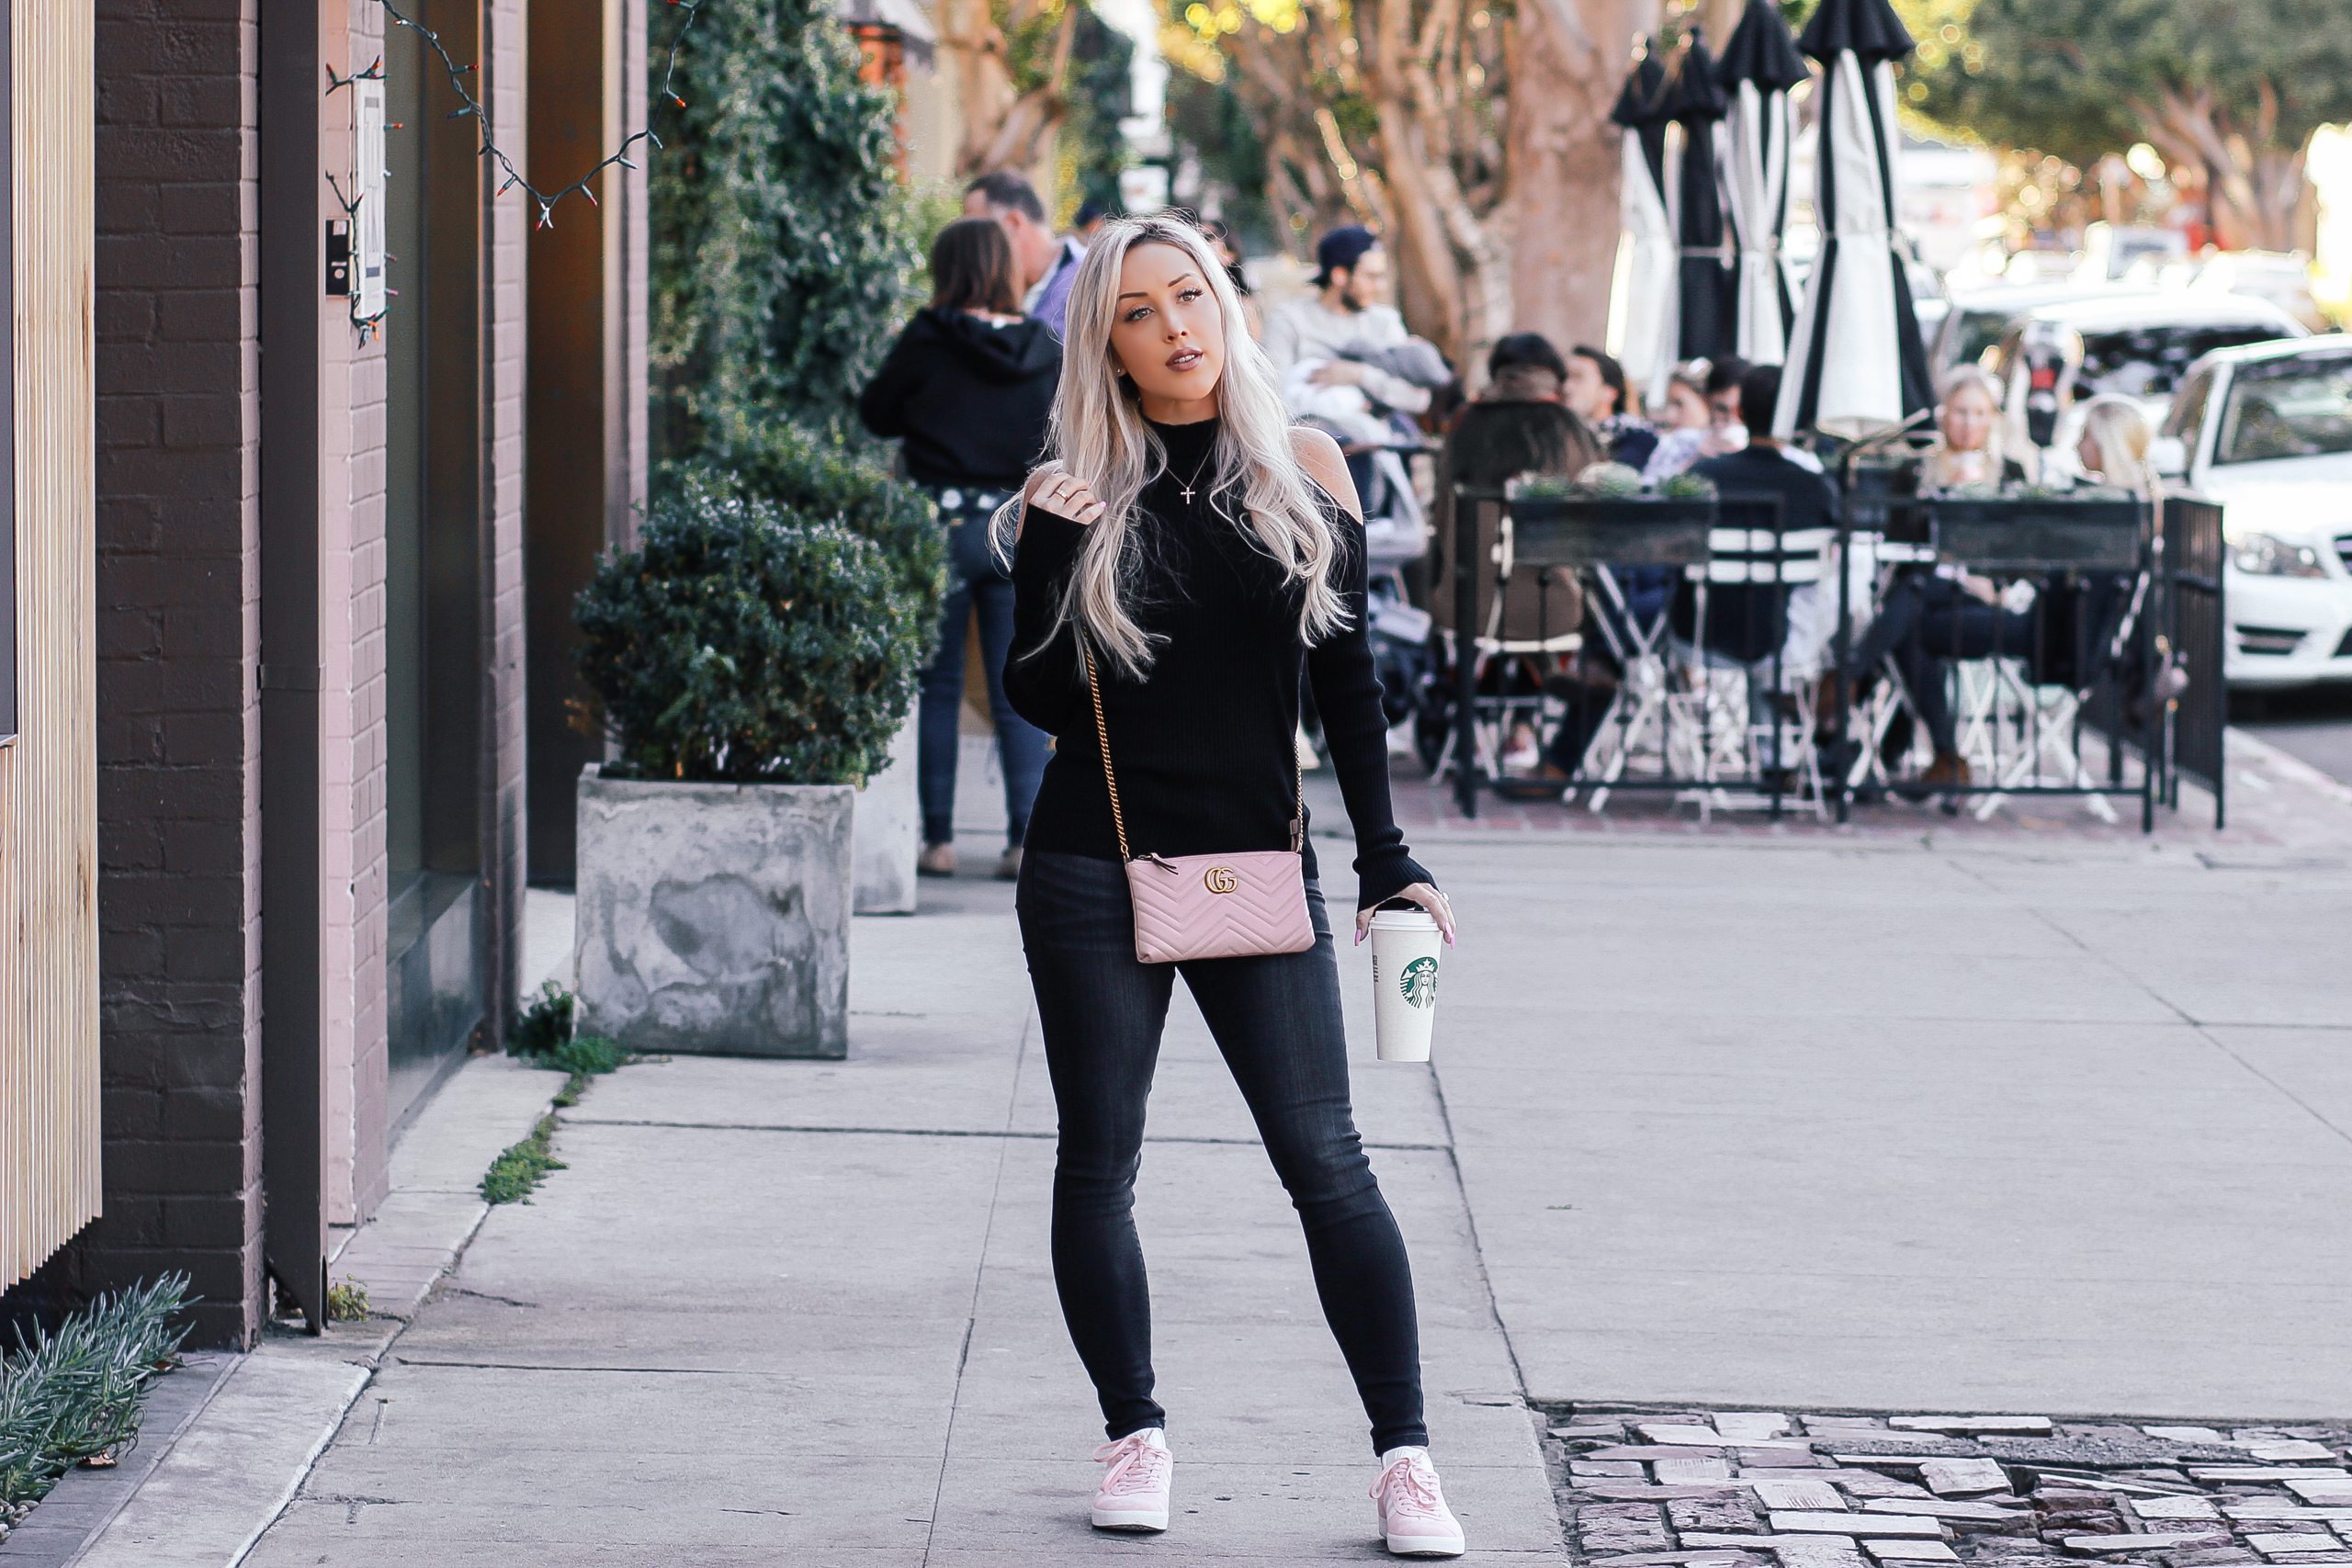 A Little Bit Of Pink | Sleek in Black, Pink Adidas, Pink Gucci Bag | Blondie in the City by Hayley Larue